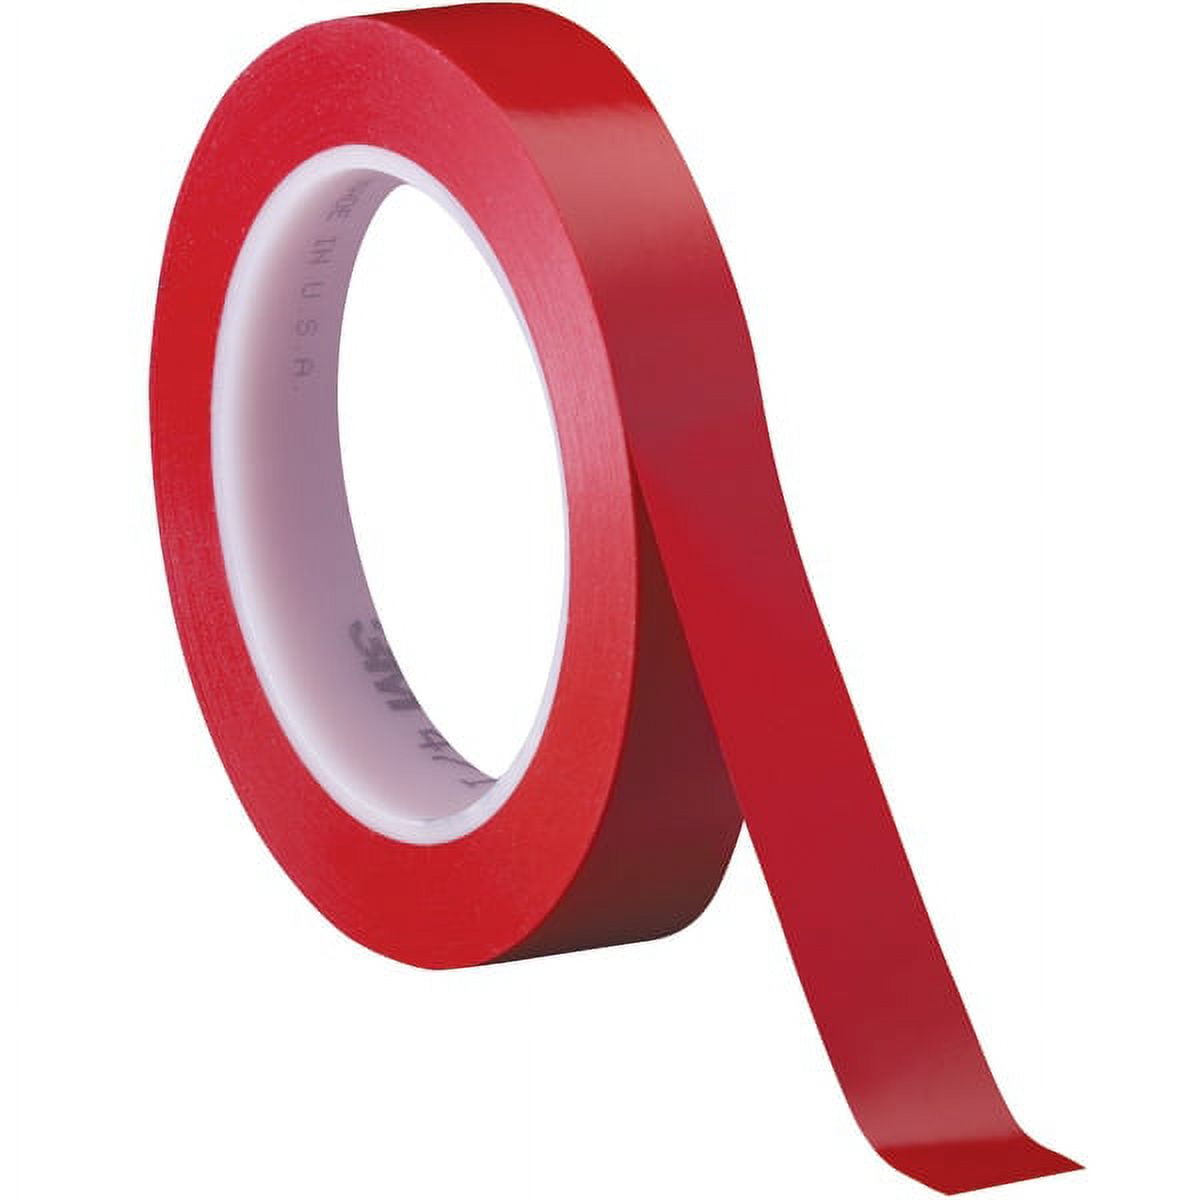 T9634713pkr 0.50 In. X 36 Yards Red 471 Vinyl Tape, Red - Pack Of 3